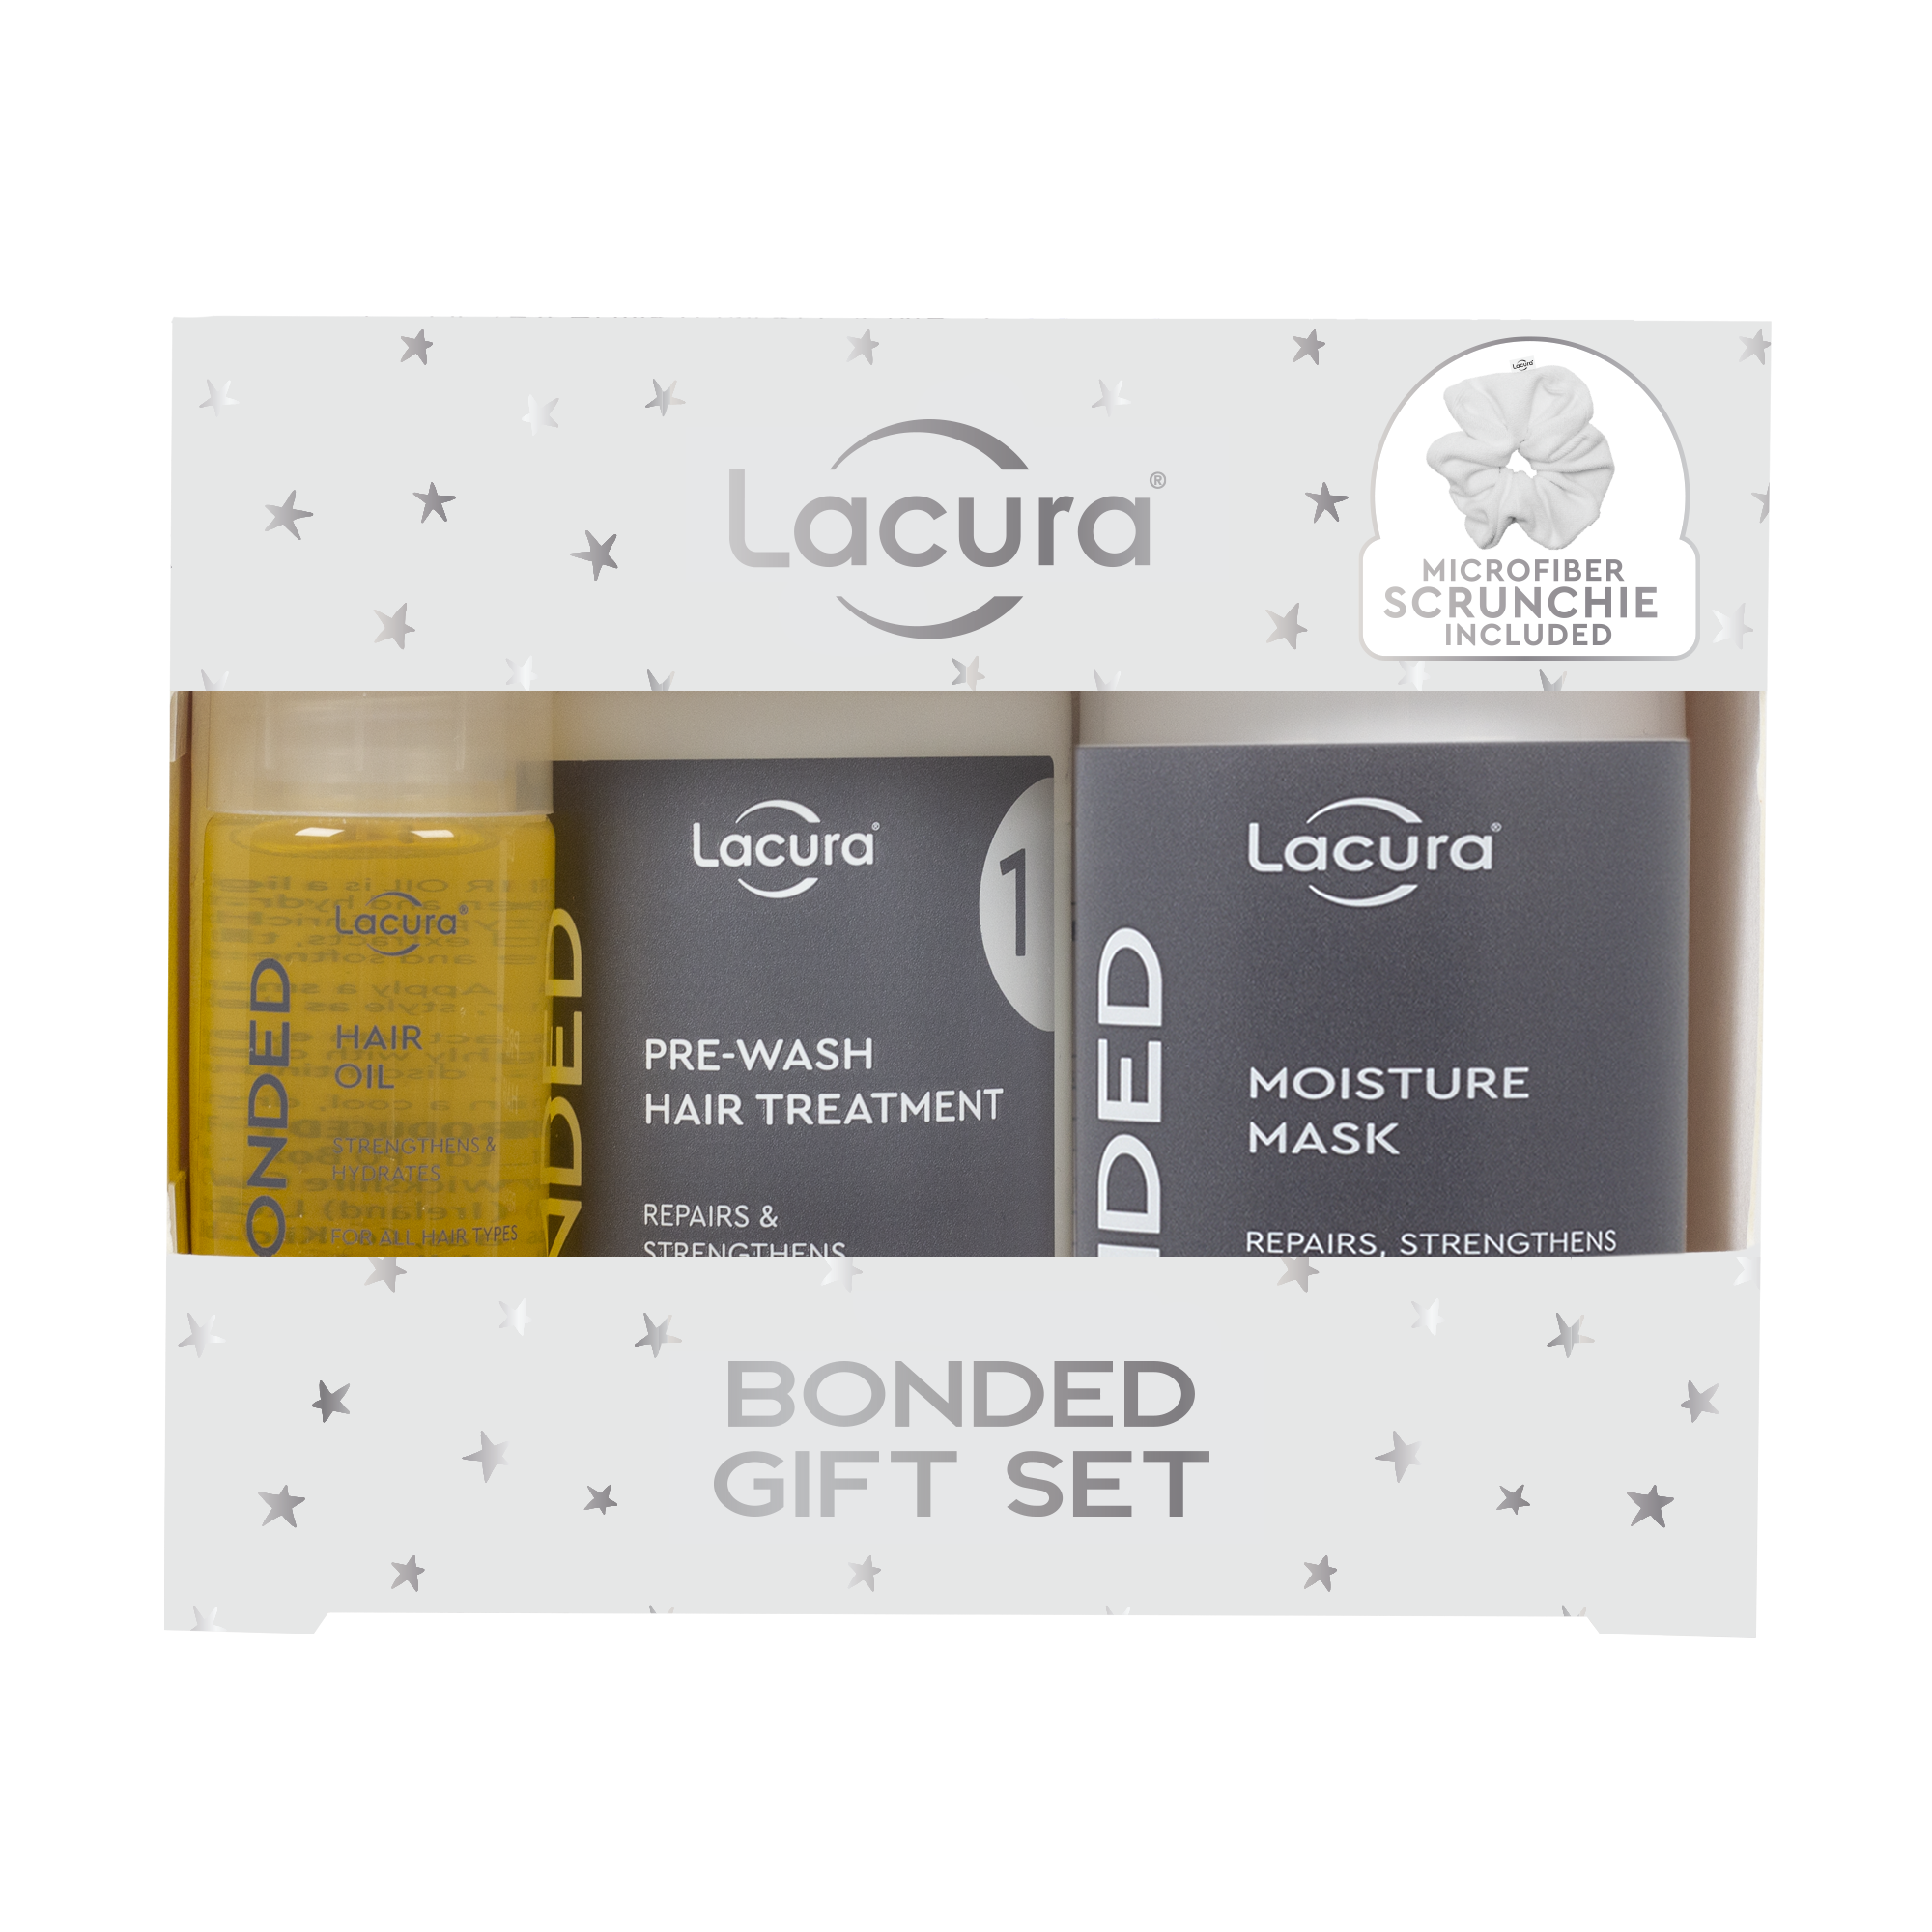 Aldi's Lacura Bonded Gift Set including Hair Oil, Pre-Wash Hair Treatment, Moisture Mask and Microfibre Scrunchie